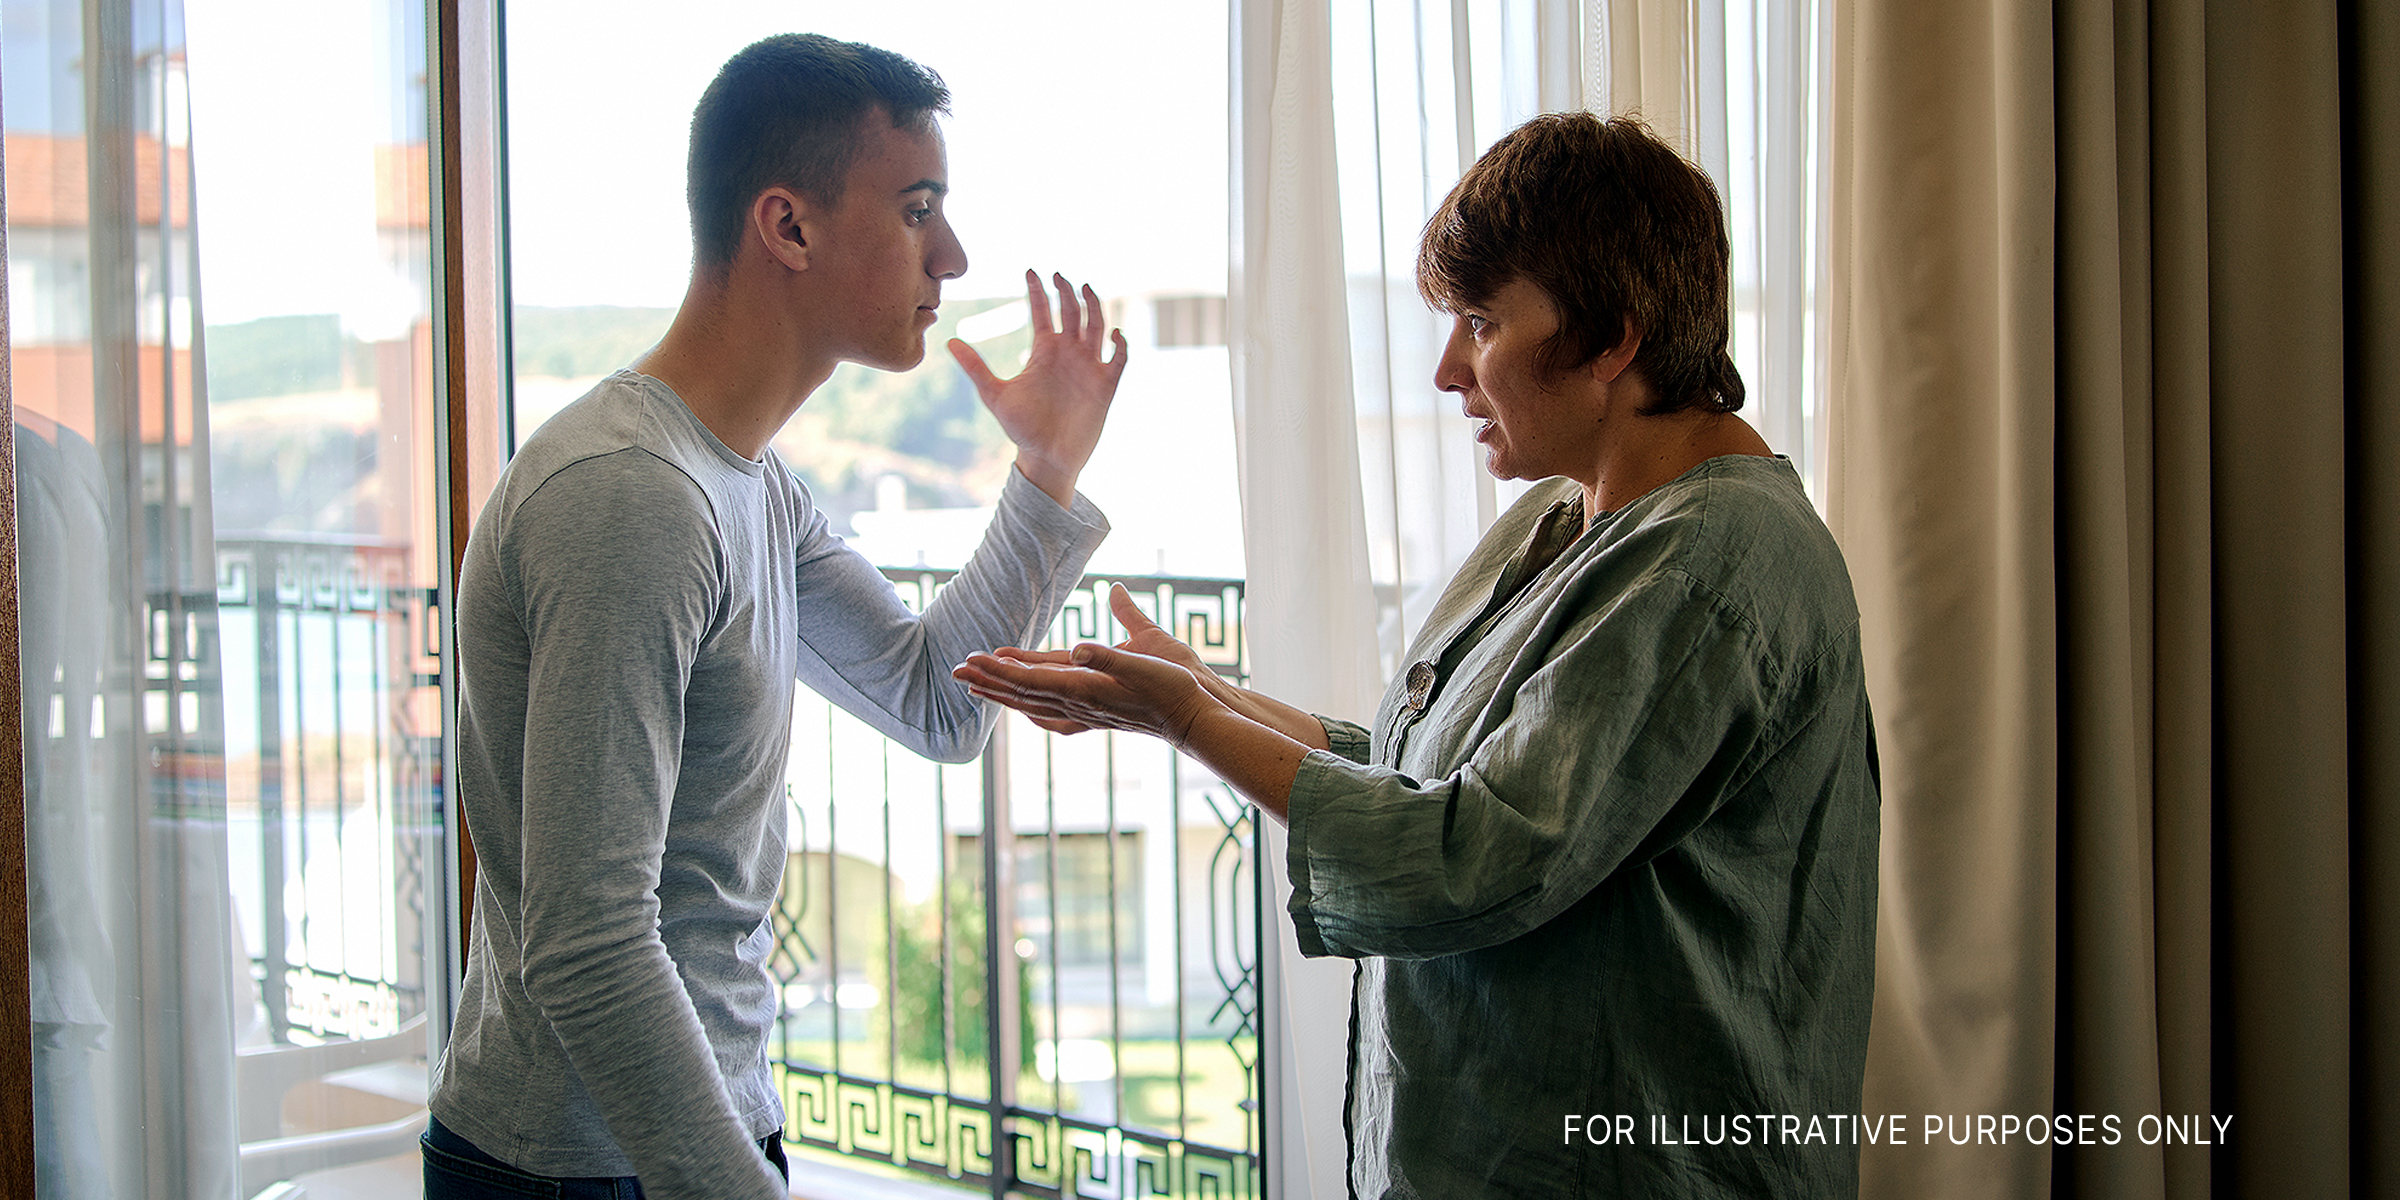 Mother arguing with teenage son | Source: Getty Images